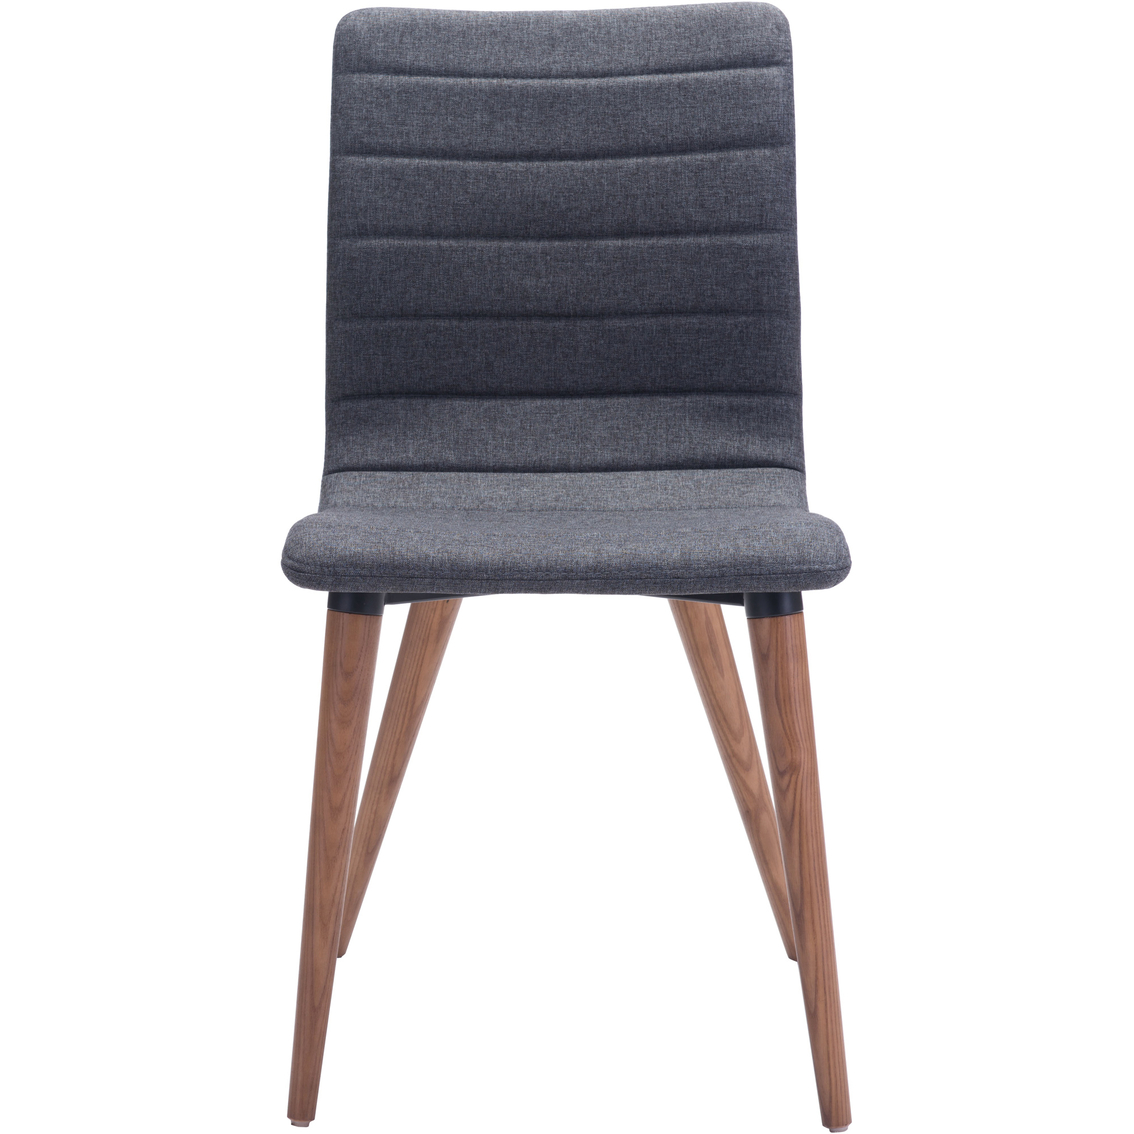 Zuo Jericho Dining Chair 2 Pk. - Image 3 of 8